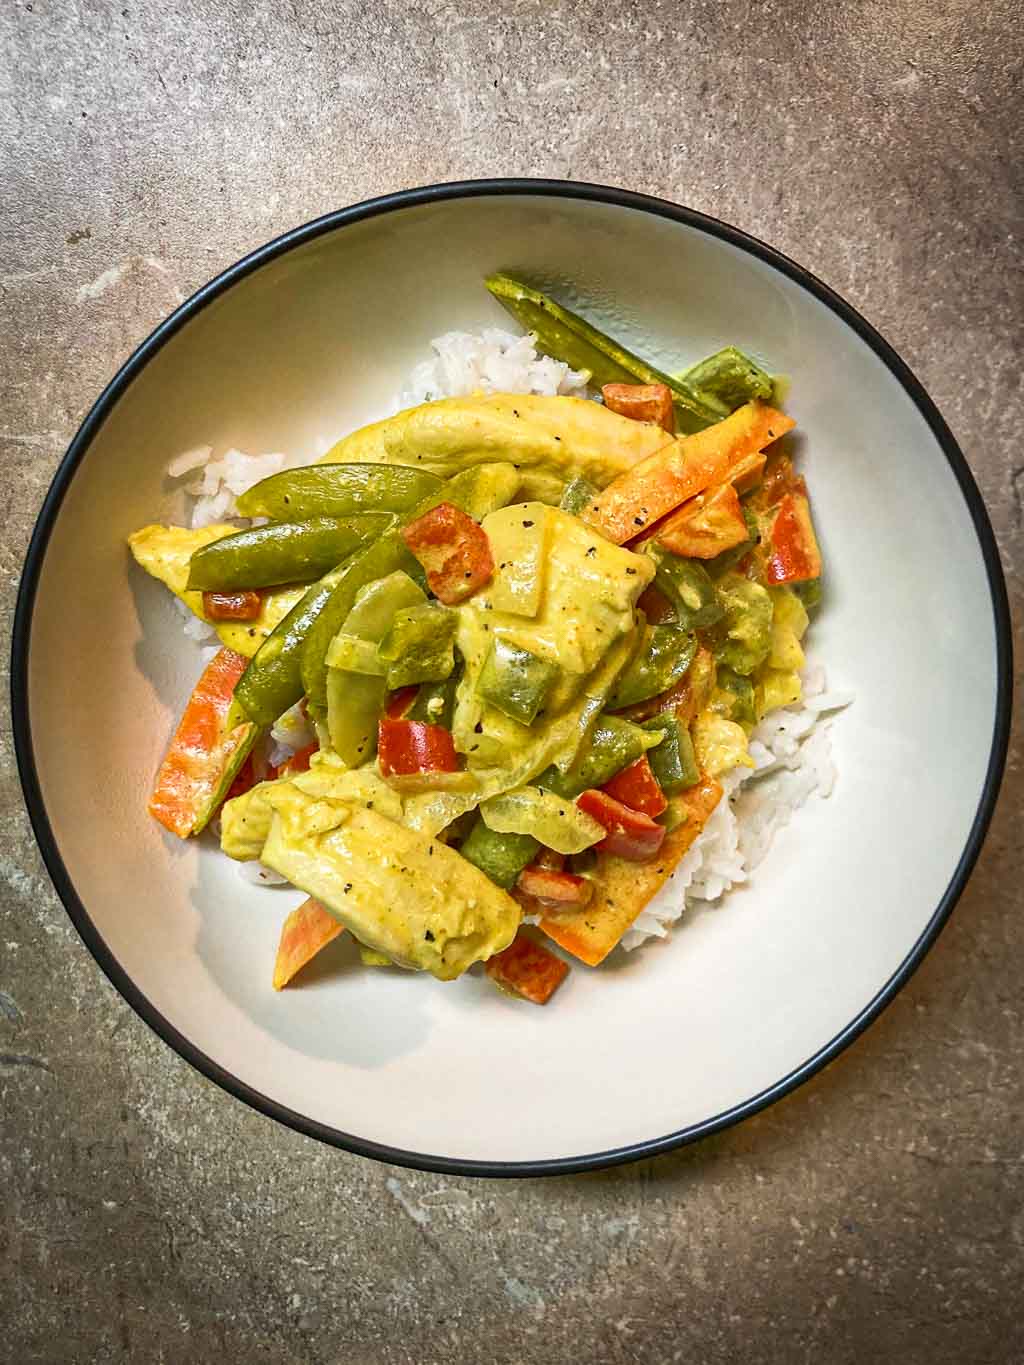 Creamy curry chicken recipe inspired by Virgin Islands National Park